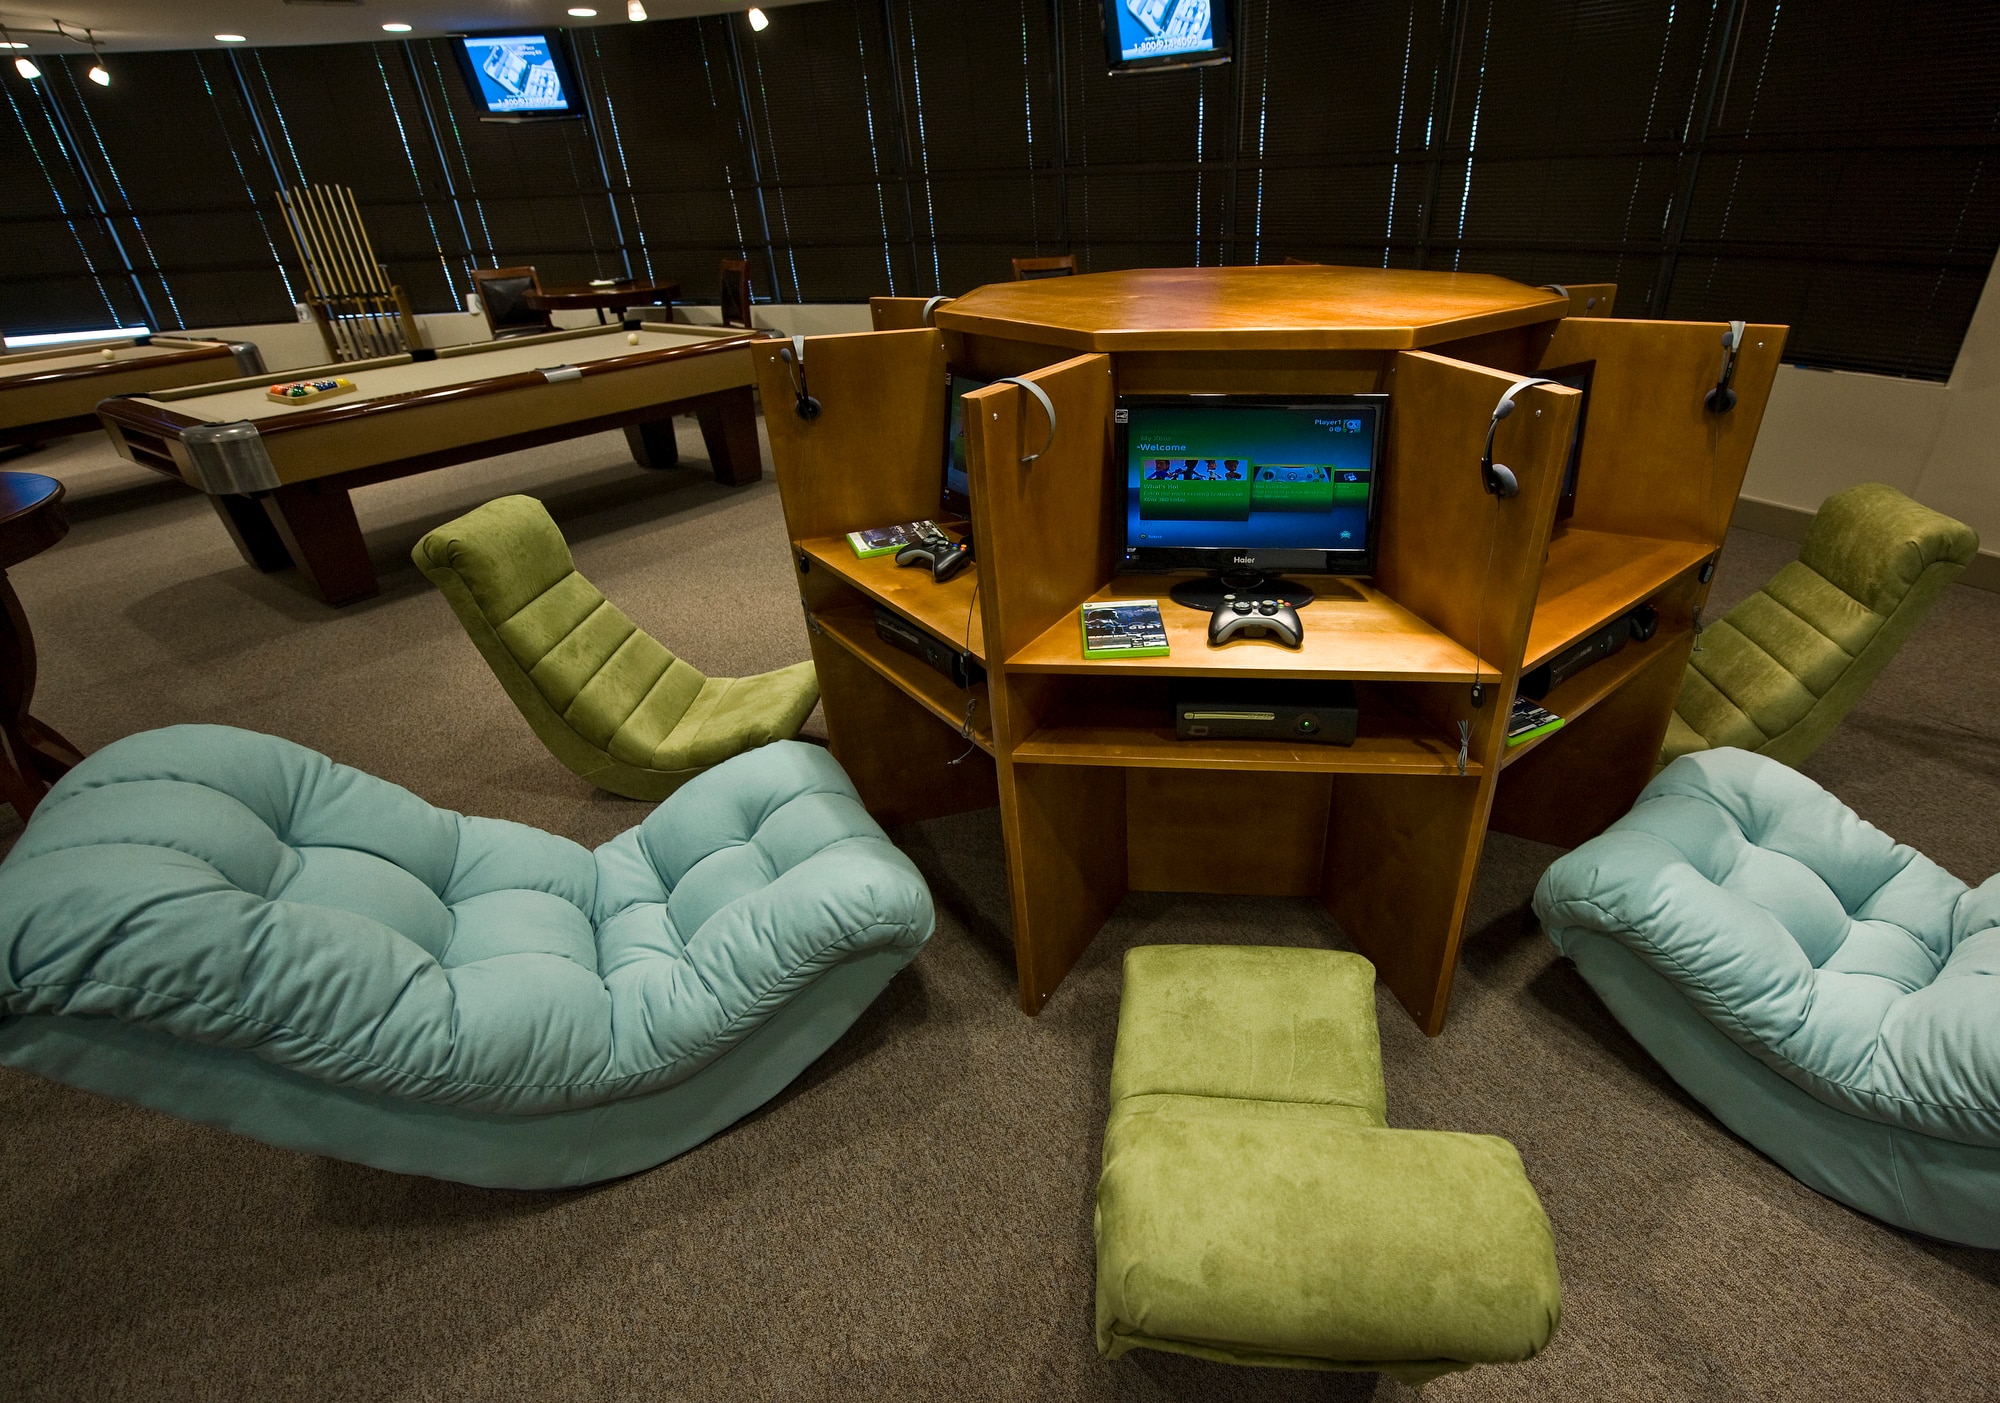 The USO San Antonio River Center is now equipped with an eight person Xbox 360 battle station for multi-person gaming, two newly refurbished pool tables and four personal gaming rooms with Nintendo Wii systems.
(U.S. Air Force photo/Staff Sgt. Bennie J. Davis III)